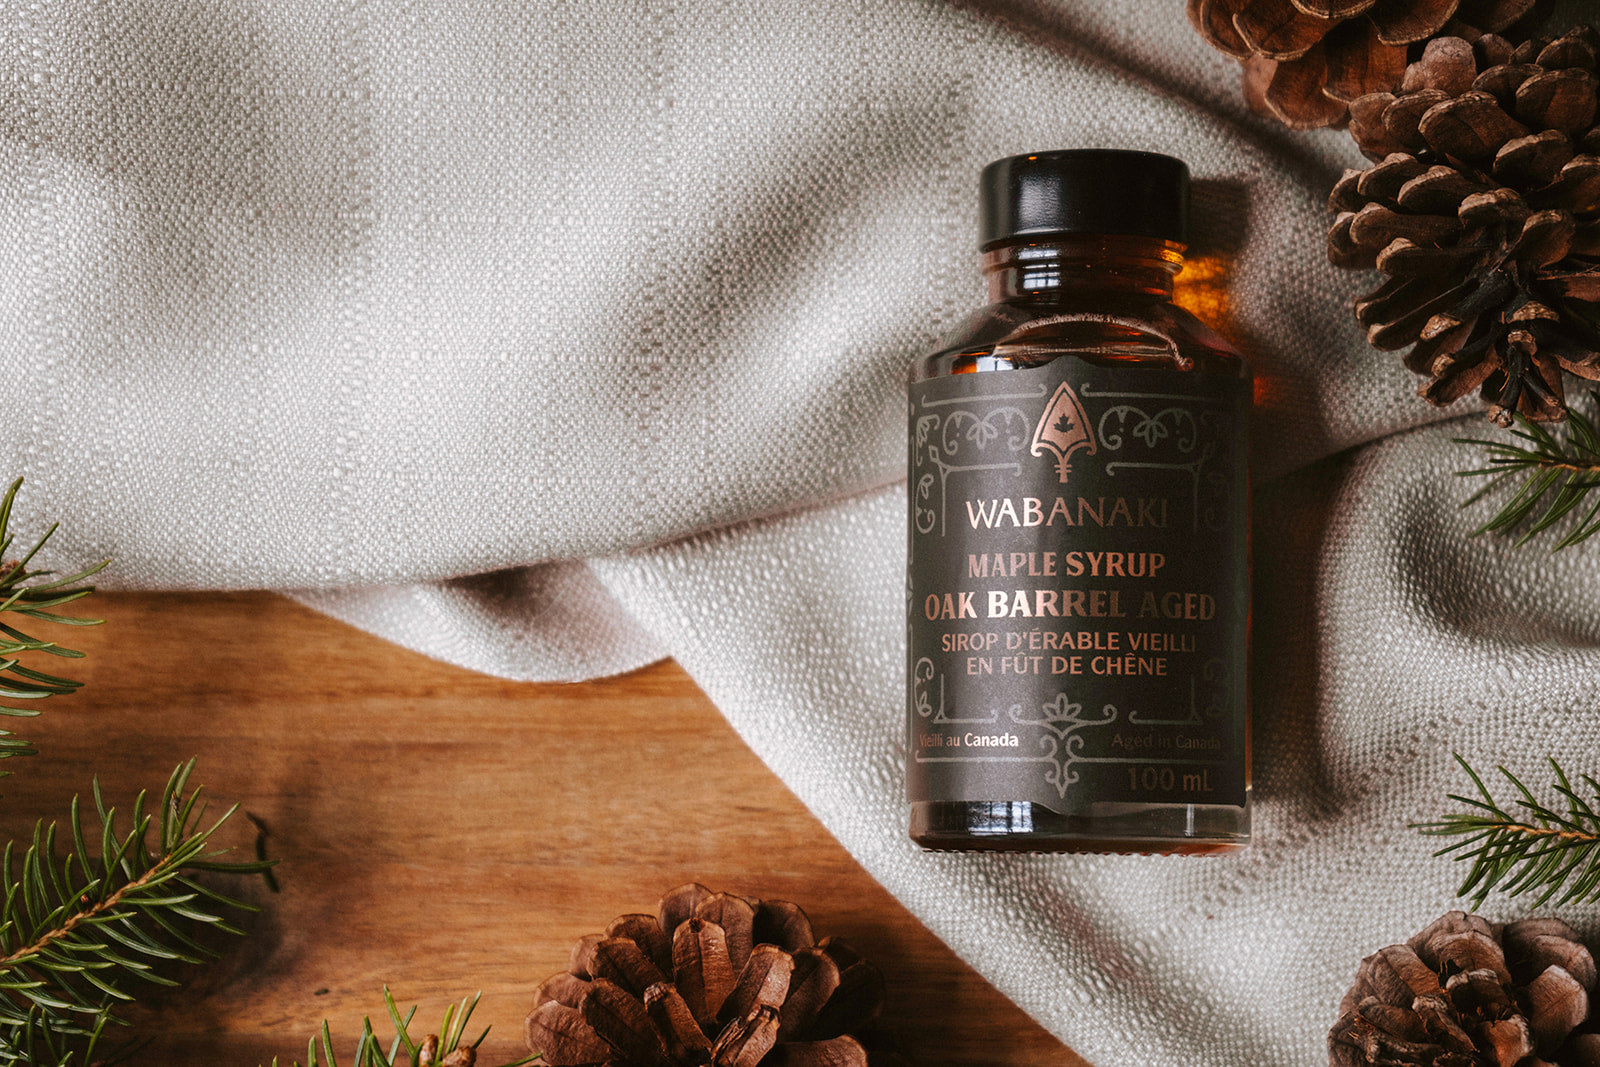 Wabanaki Maple Syrup pictured on a white cloth. This maple syrup is 100% Indigenous, female owned maple syrup company from Canada with barrel aged maple syrup and Golden Grade A available